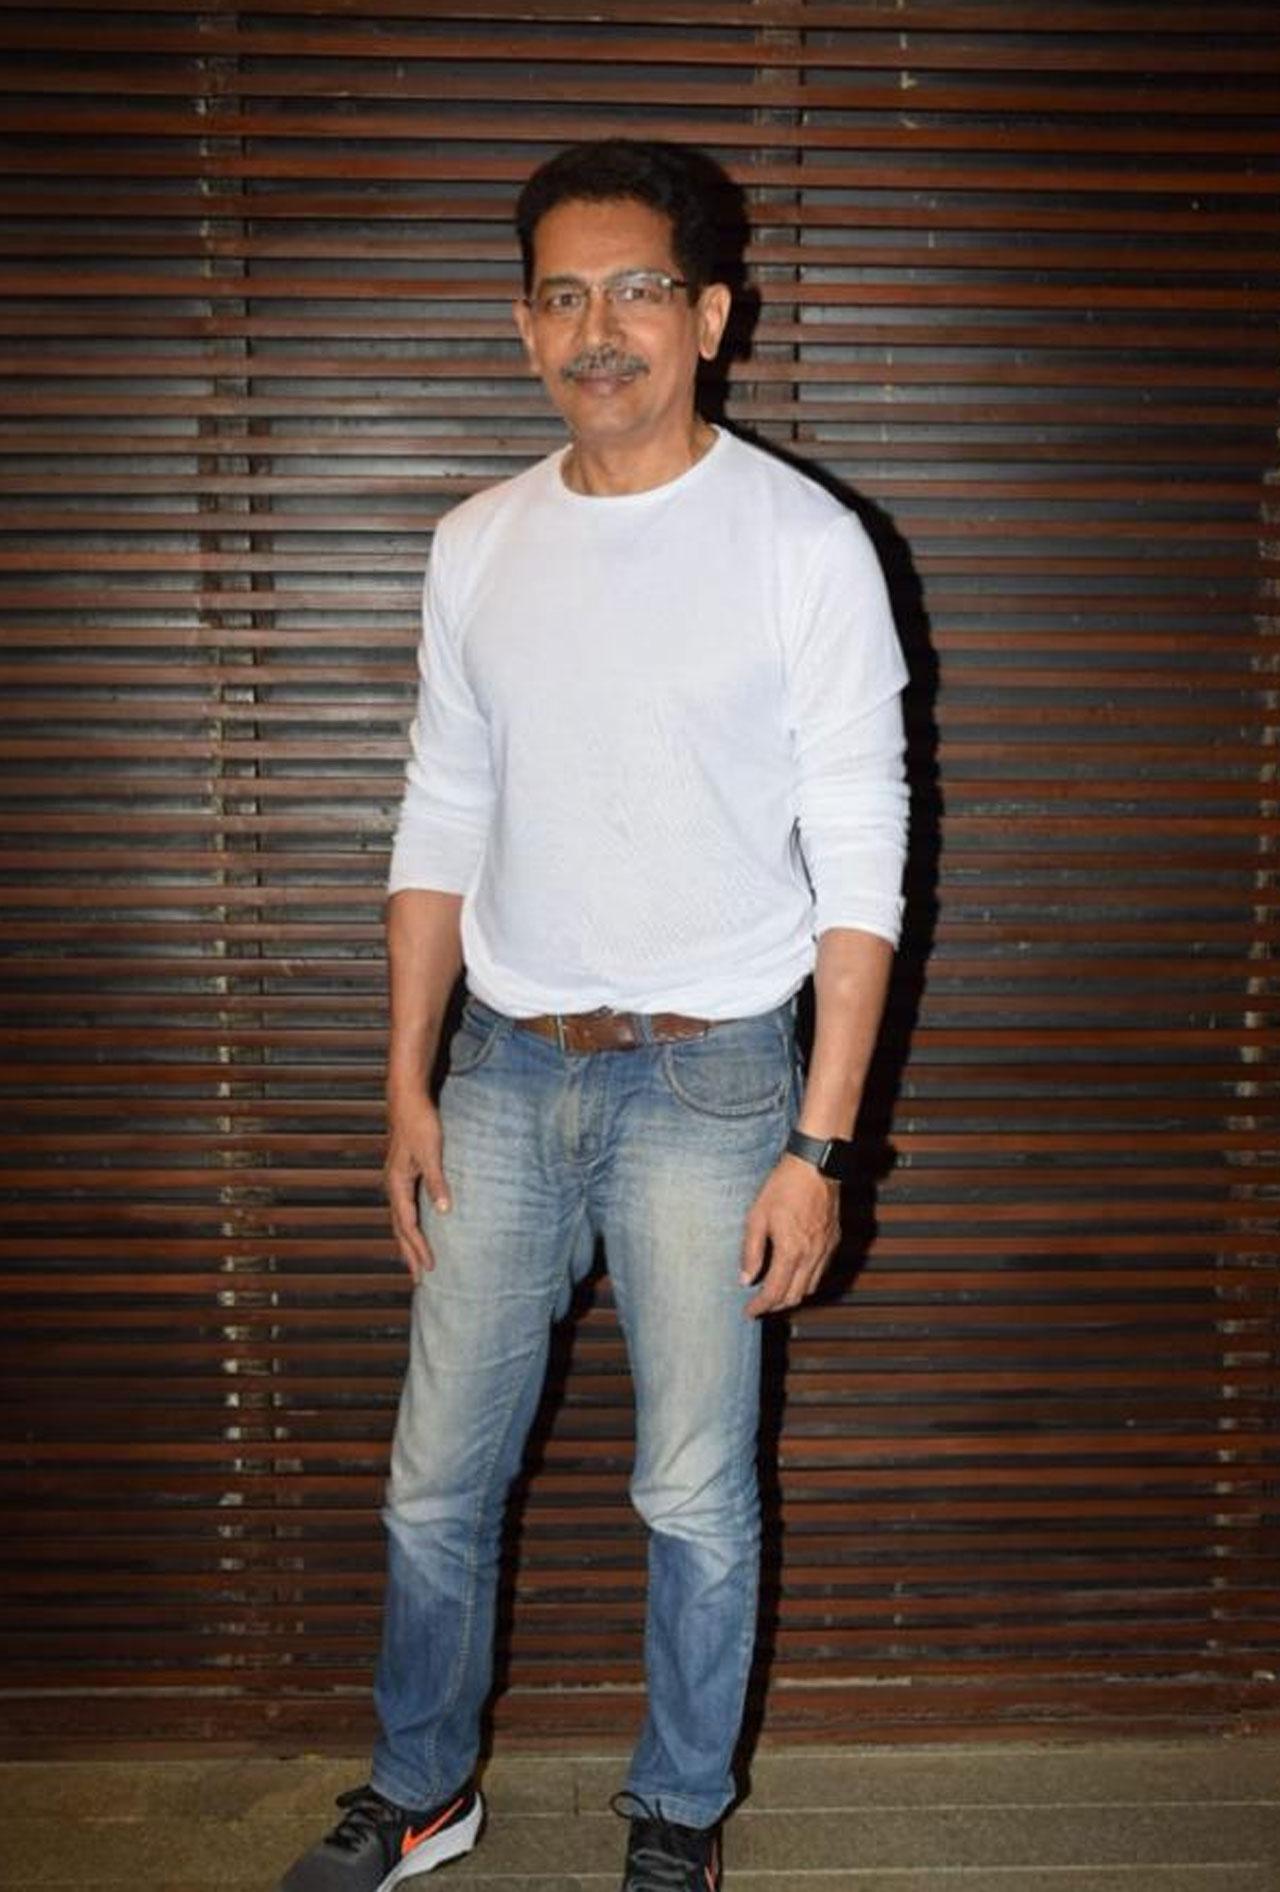 Atul Kulkarni plays a crucial role in the film. Kulkarni notes that the film, at its heart, is a drama that studies morality from different perspectives. He explains, 